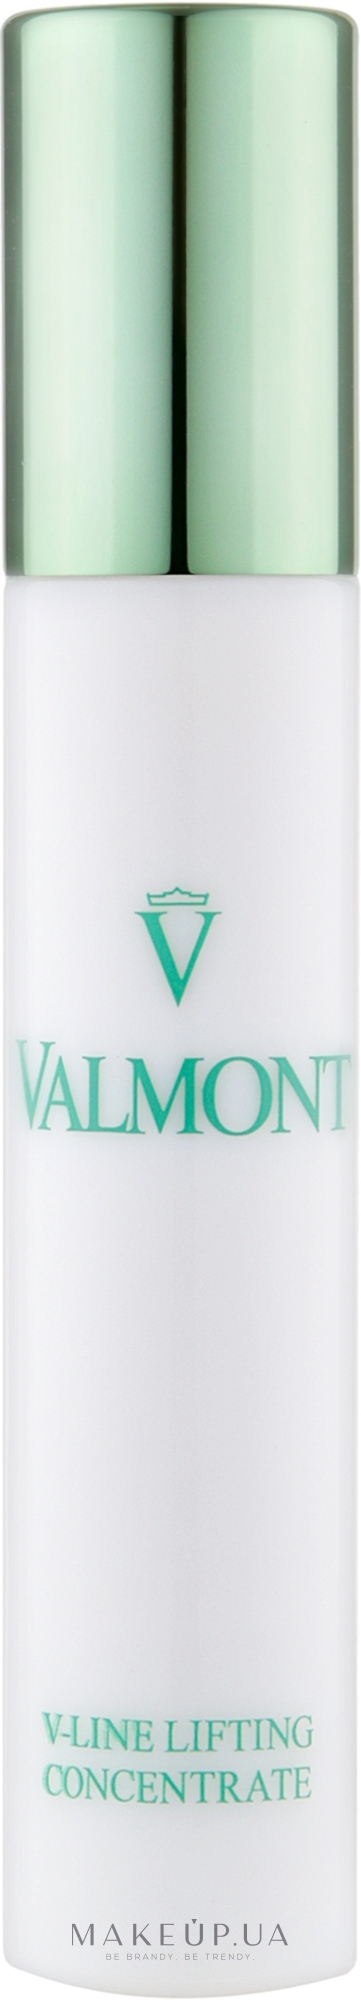 Valmont, V-Line Lifting Concentrate